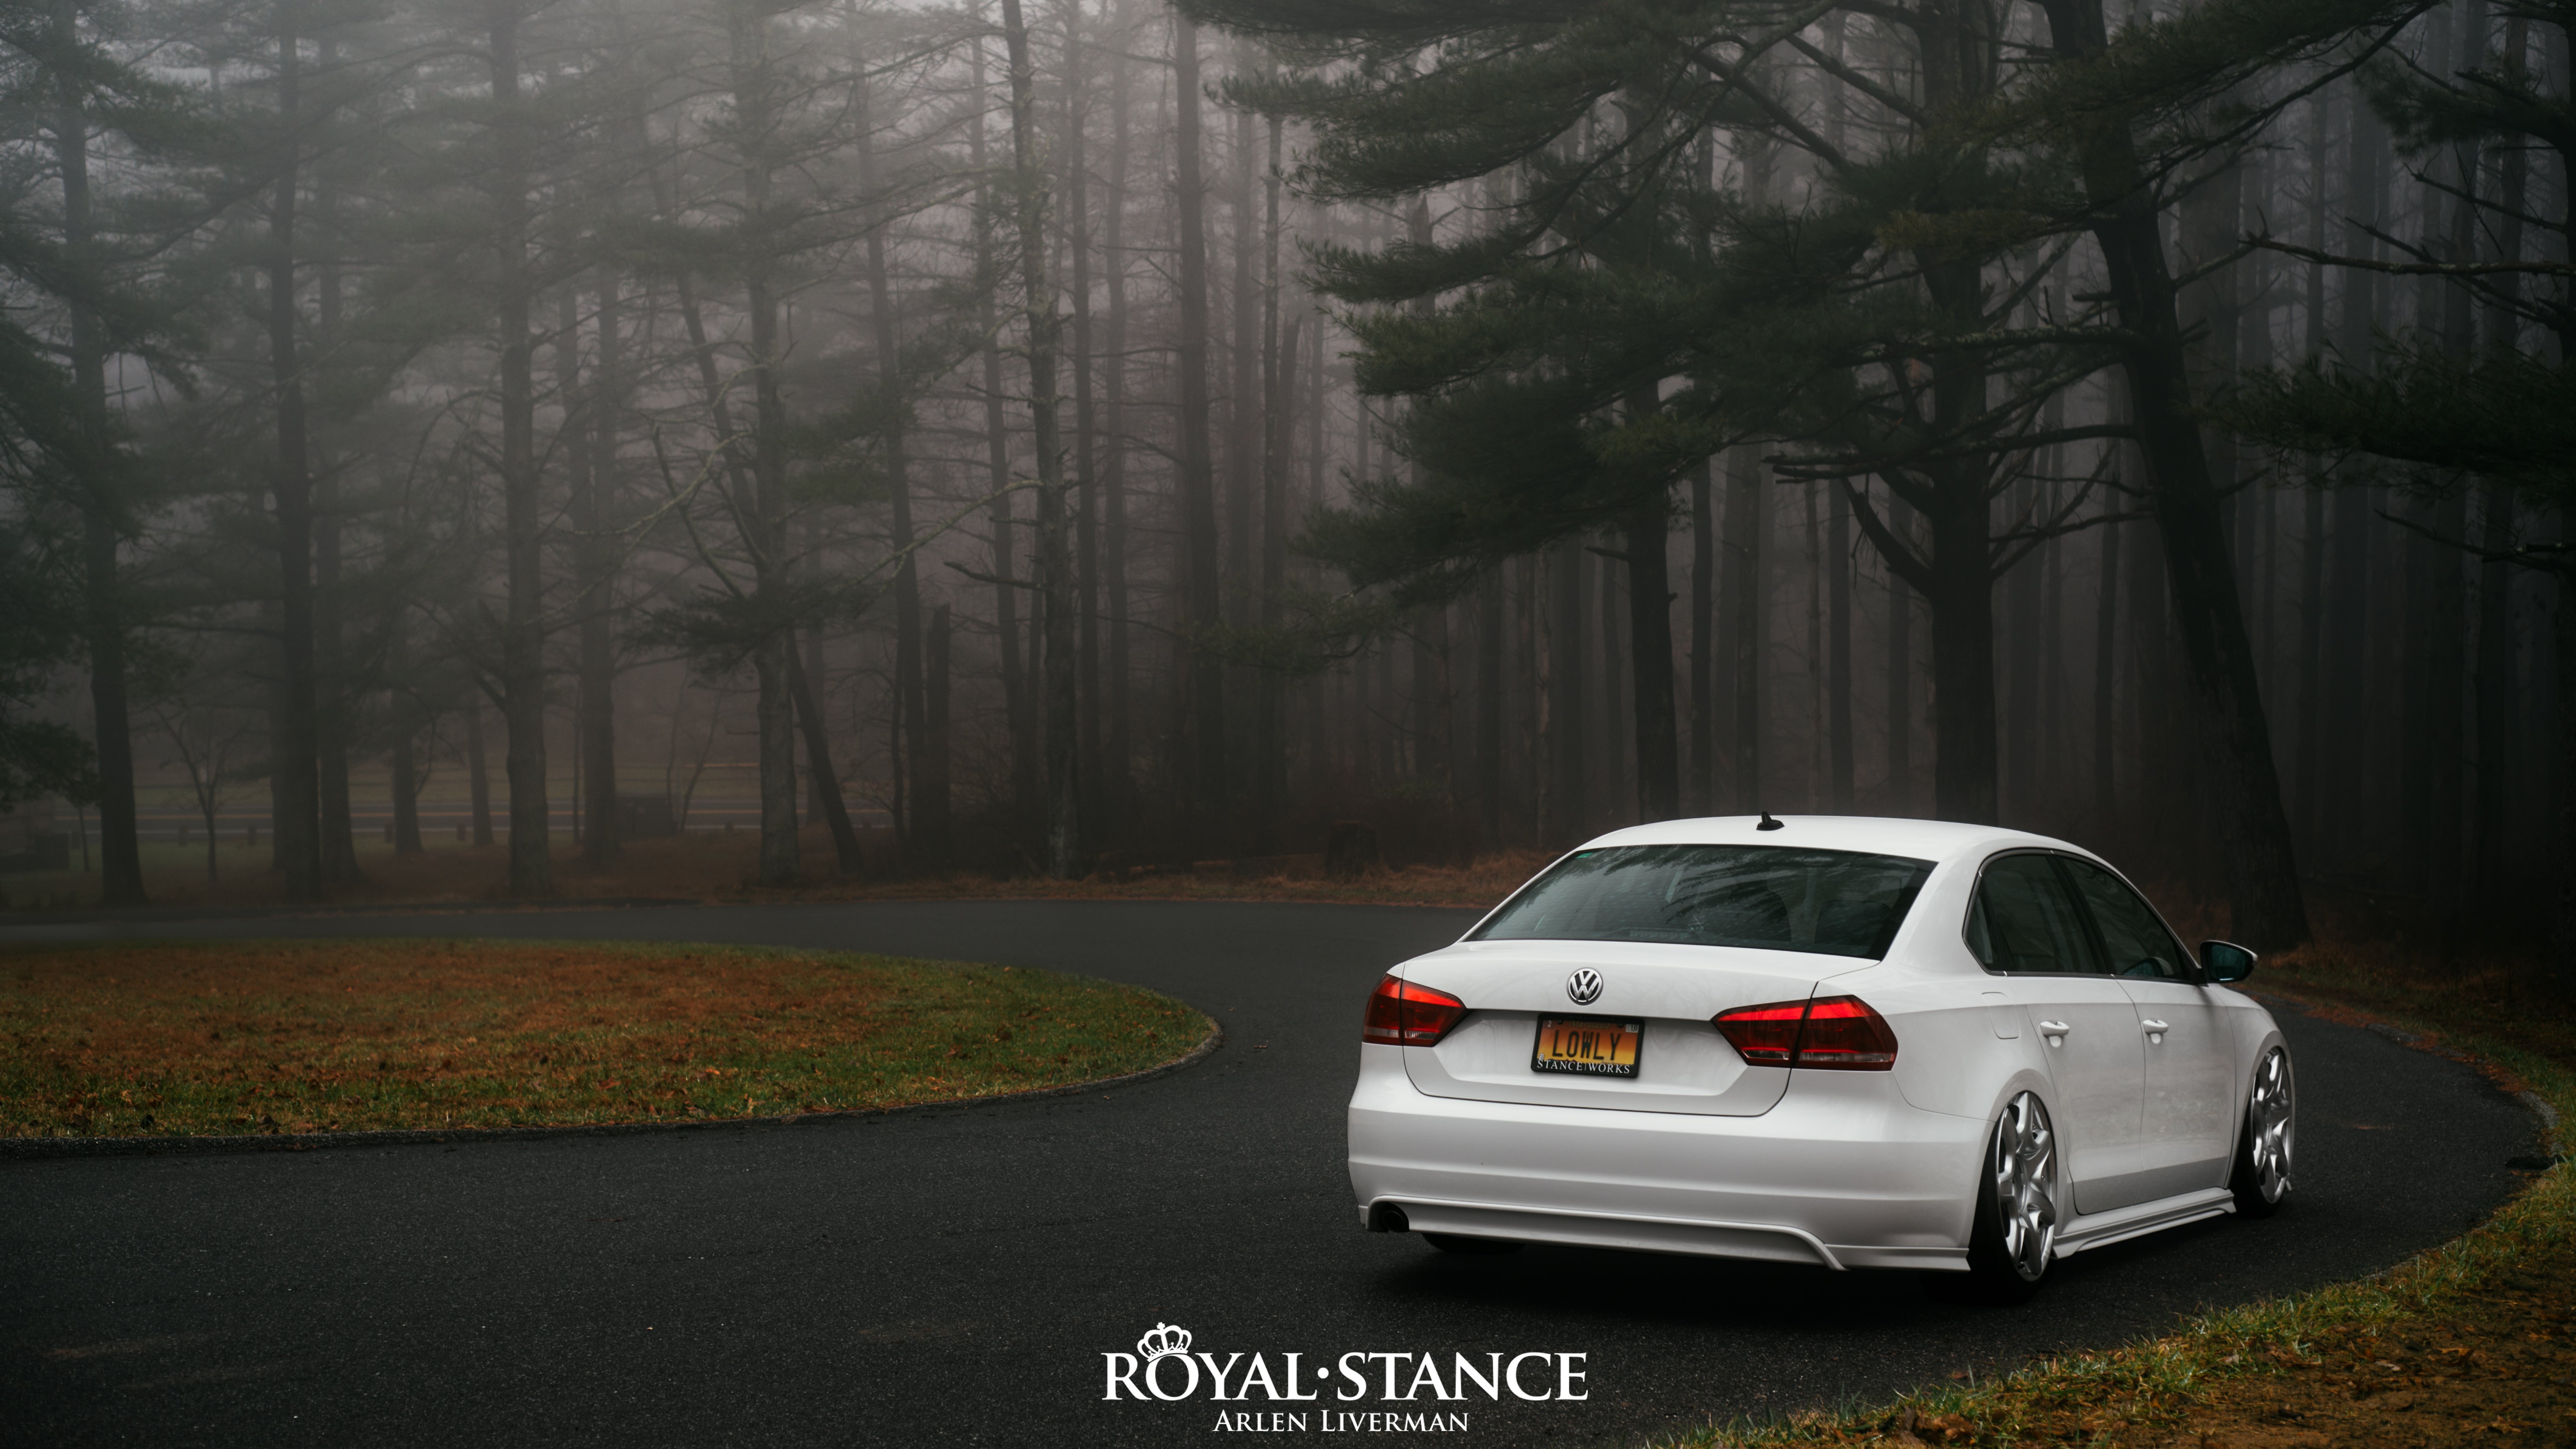 Red LED Taillights on White Lowered VW Passat - Photo by Arlen Liverman